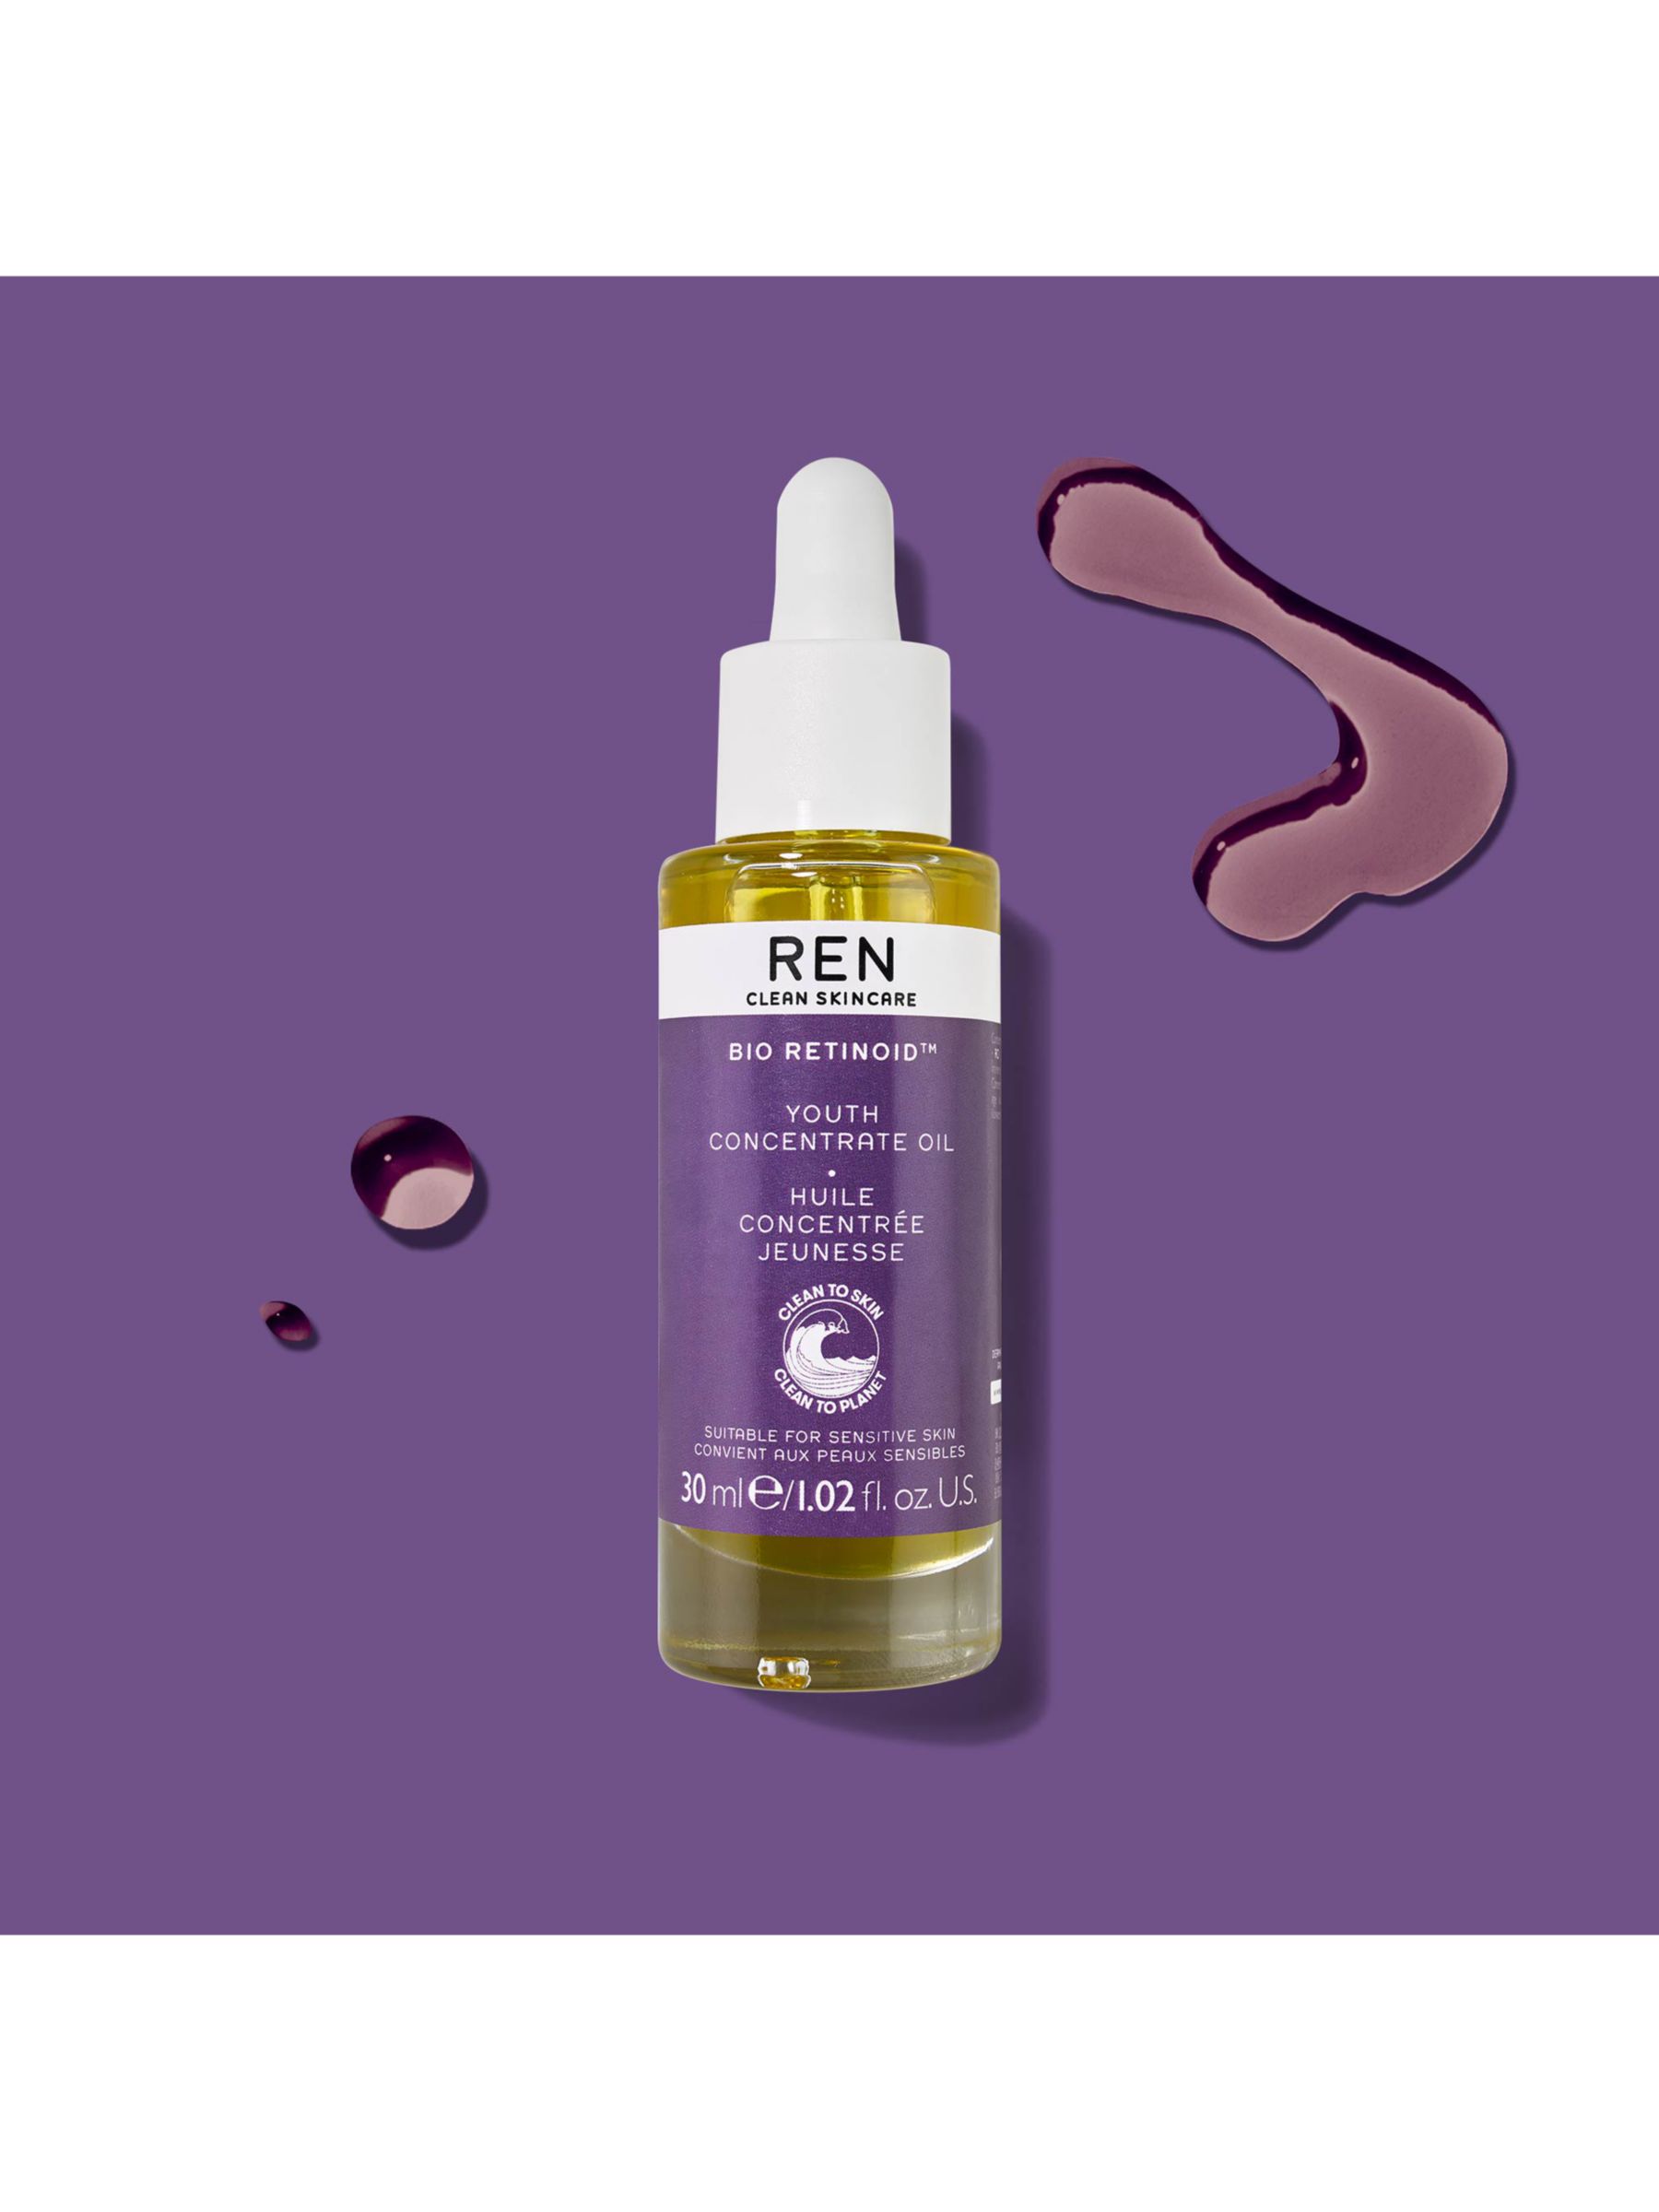 REN Clean Skincare Bio Retinoid™ Youth Concentrate Oil, 30ml 3